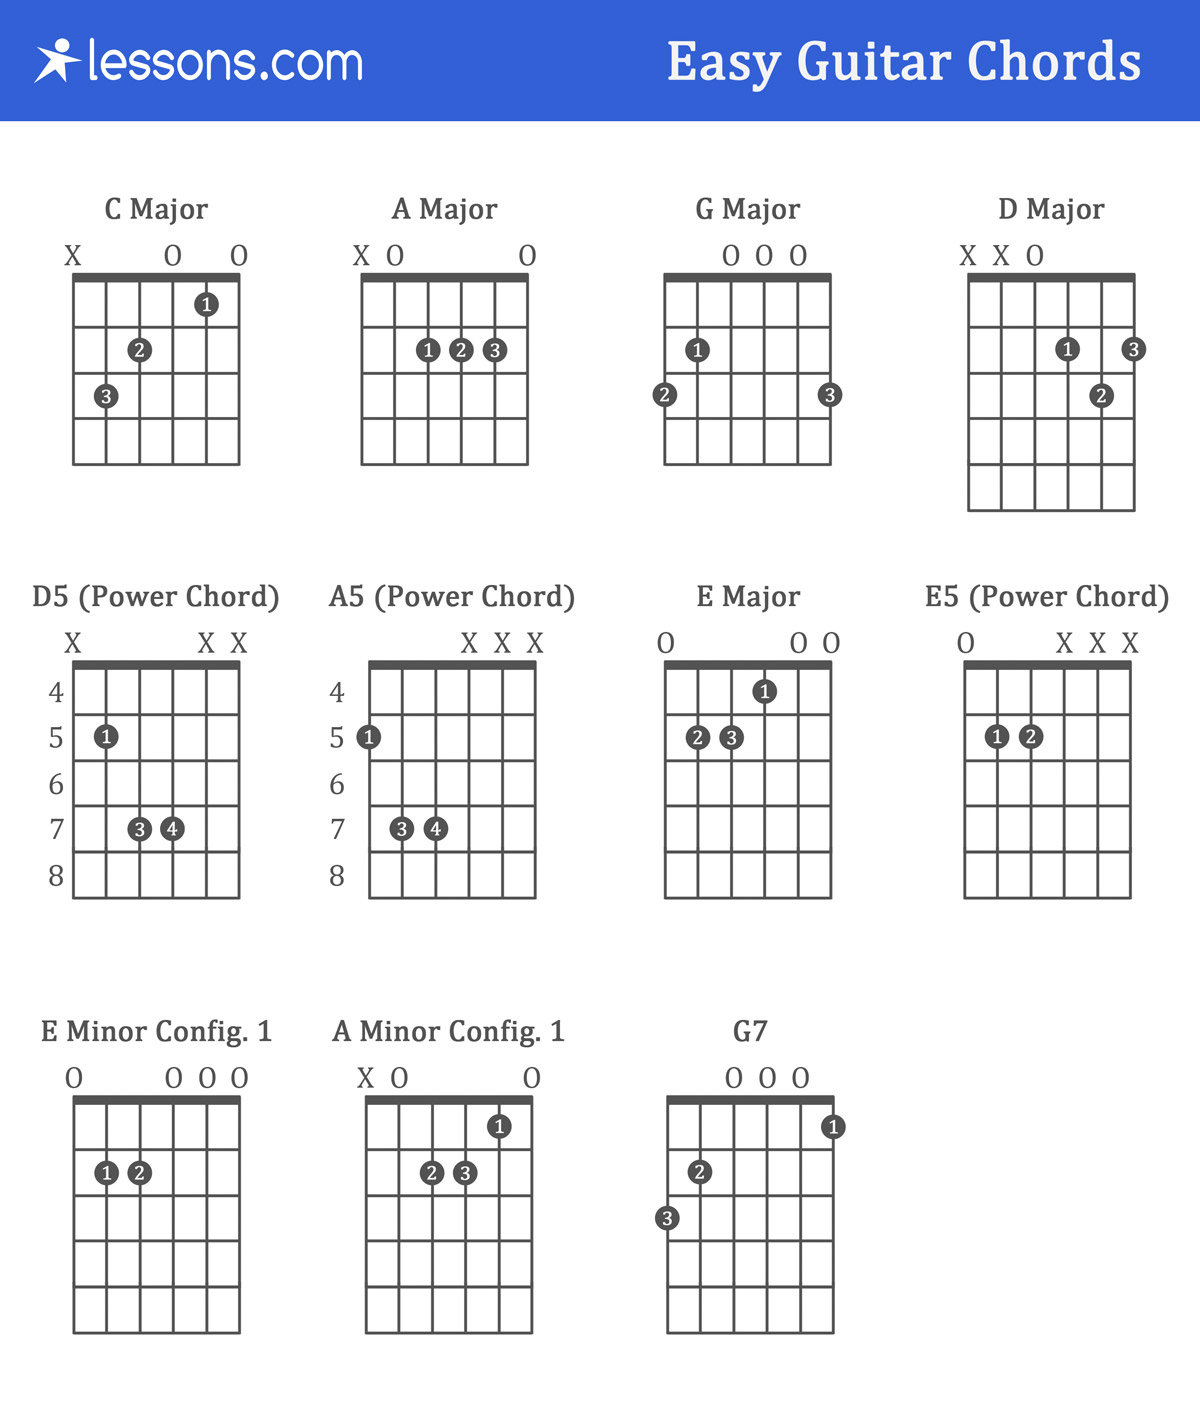 Chords On Guitar The 11 Easy Guitar Chords For Beginners With Charts Examples